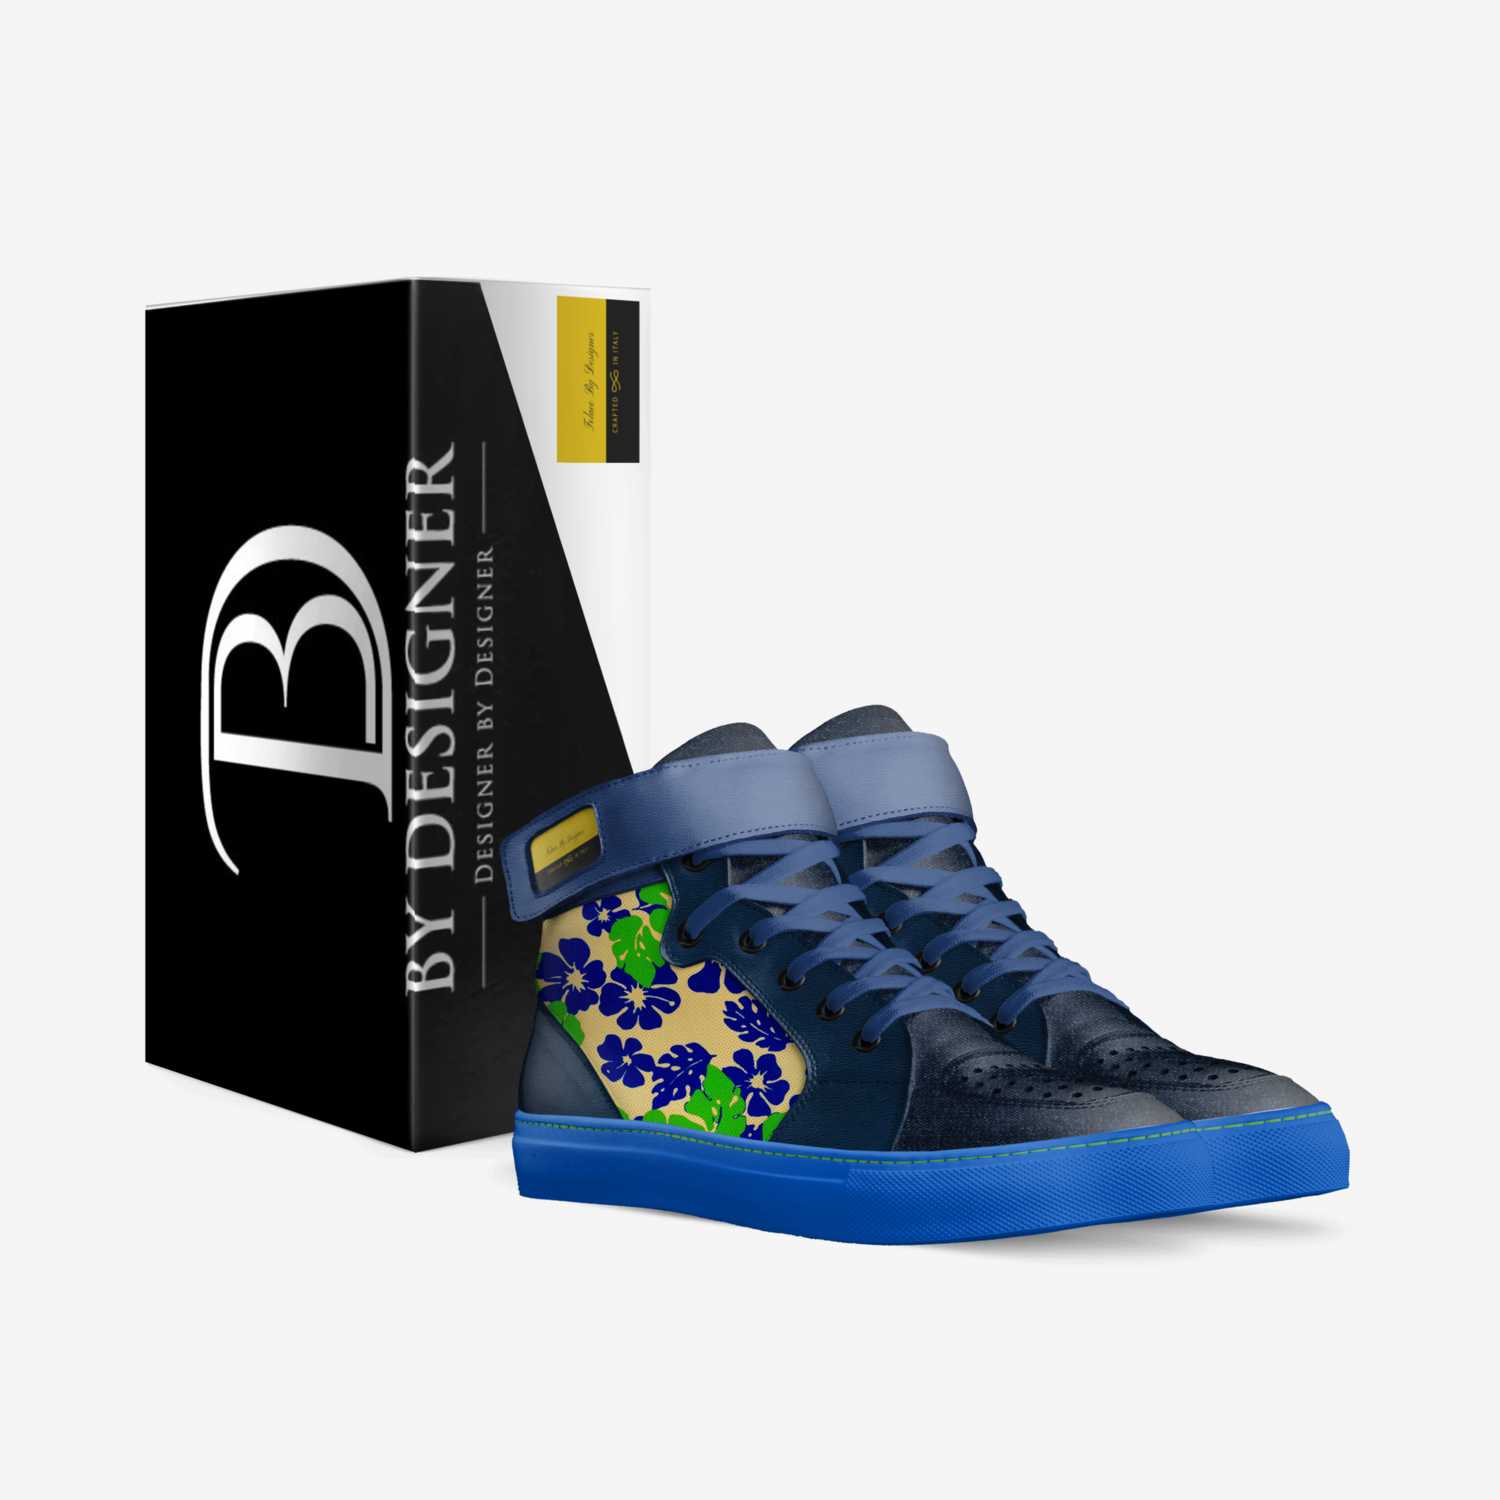 Folaeo By Designer custom made in Italy shoes by Designer By Designer | Box view